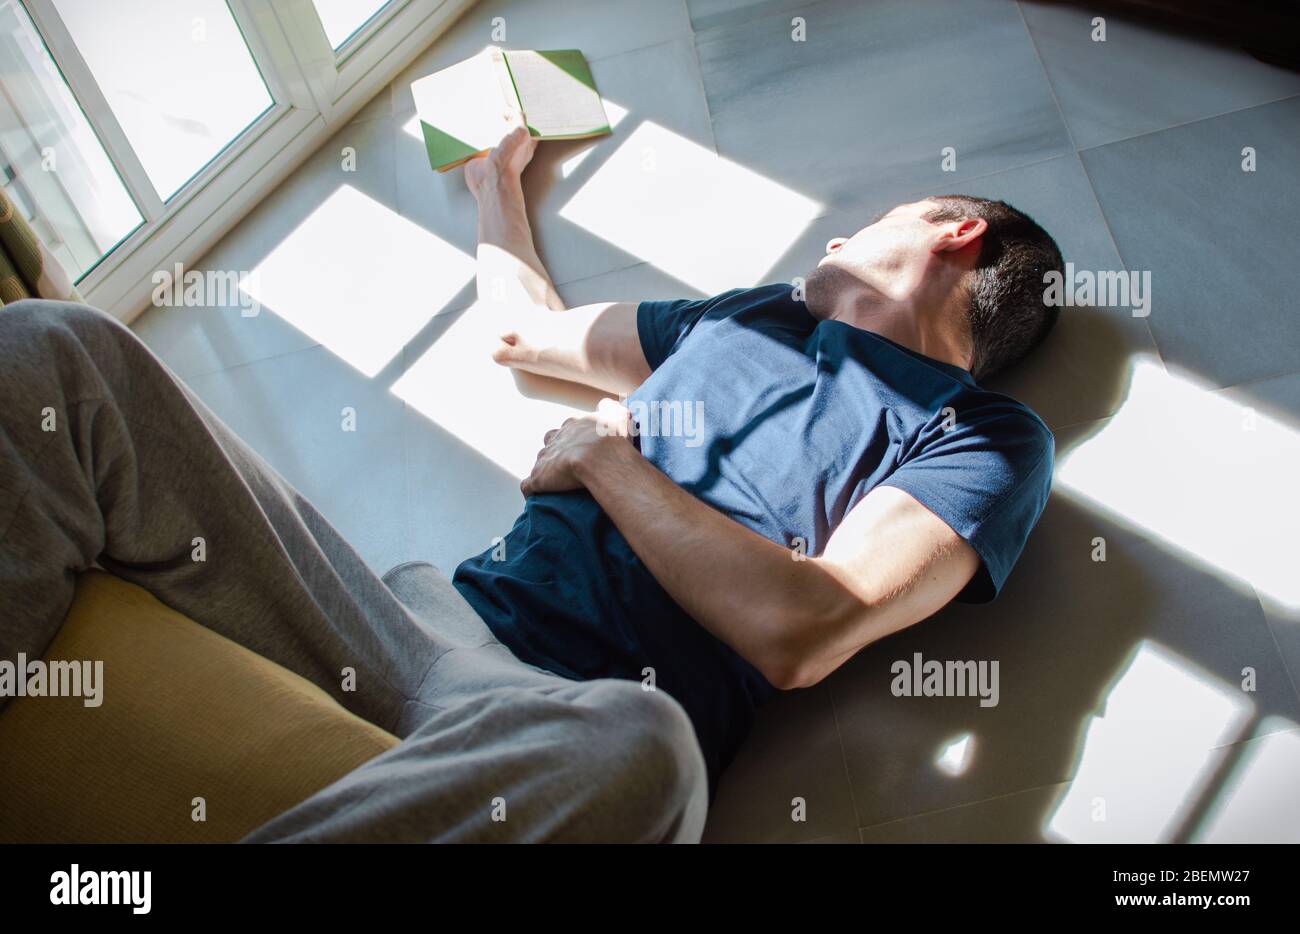 Bored young man stay at home. Man lying on the floor reading and enjoying the sun of the window. Concept of stay at home, boredom, freedom, solitude.. Stock Photo